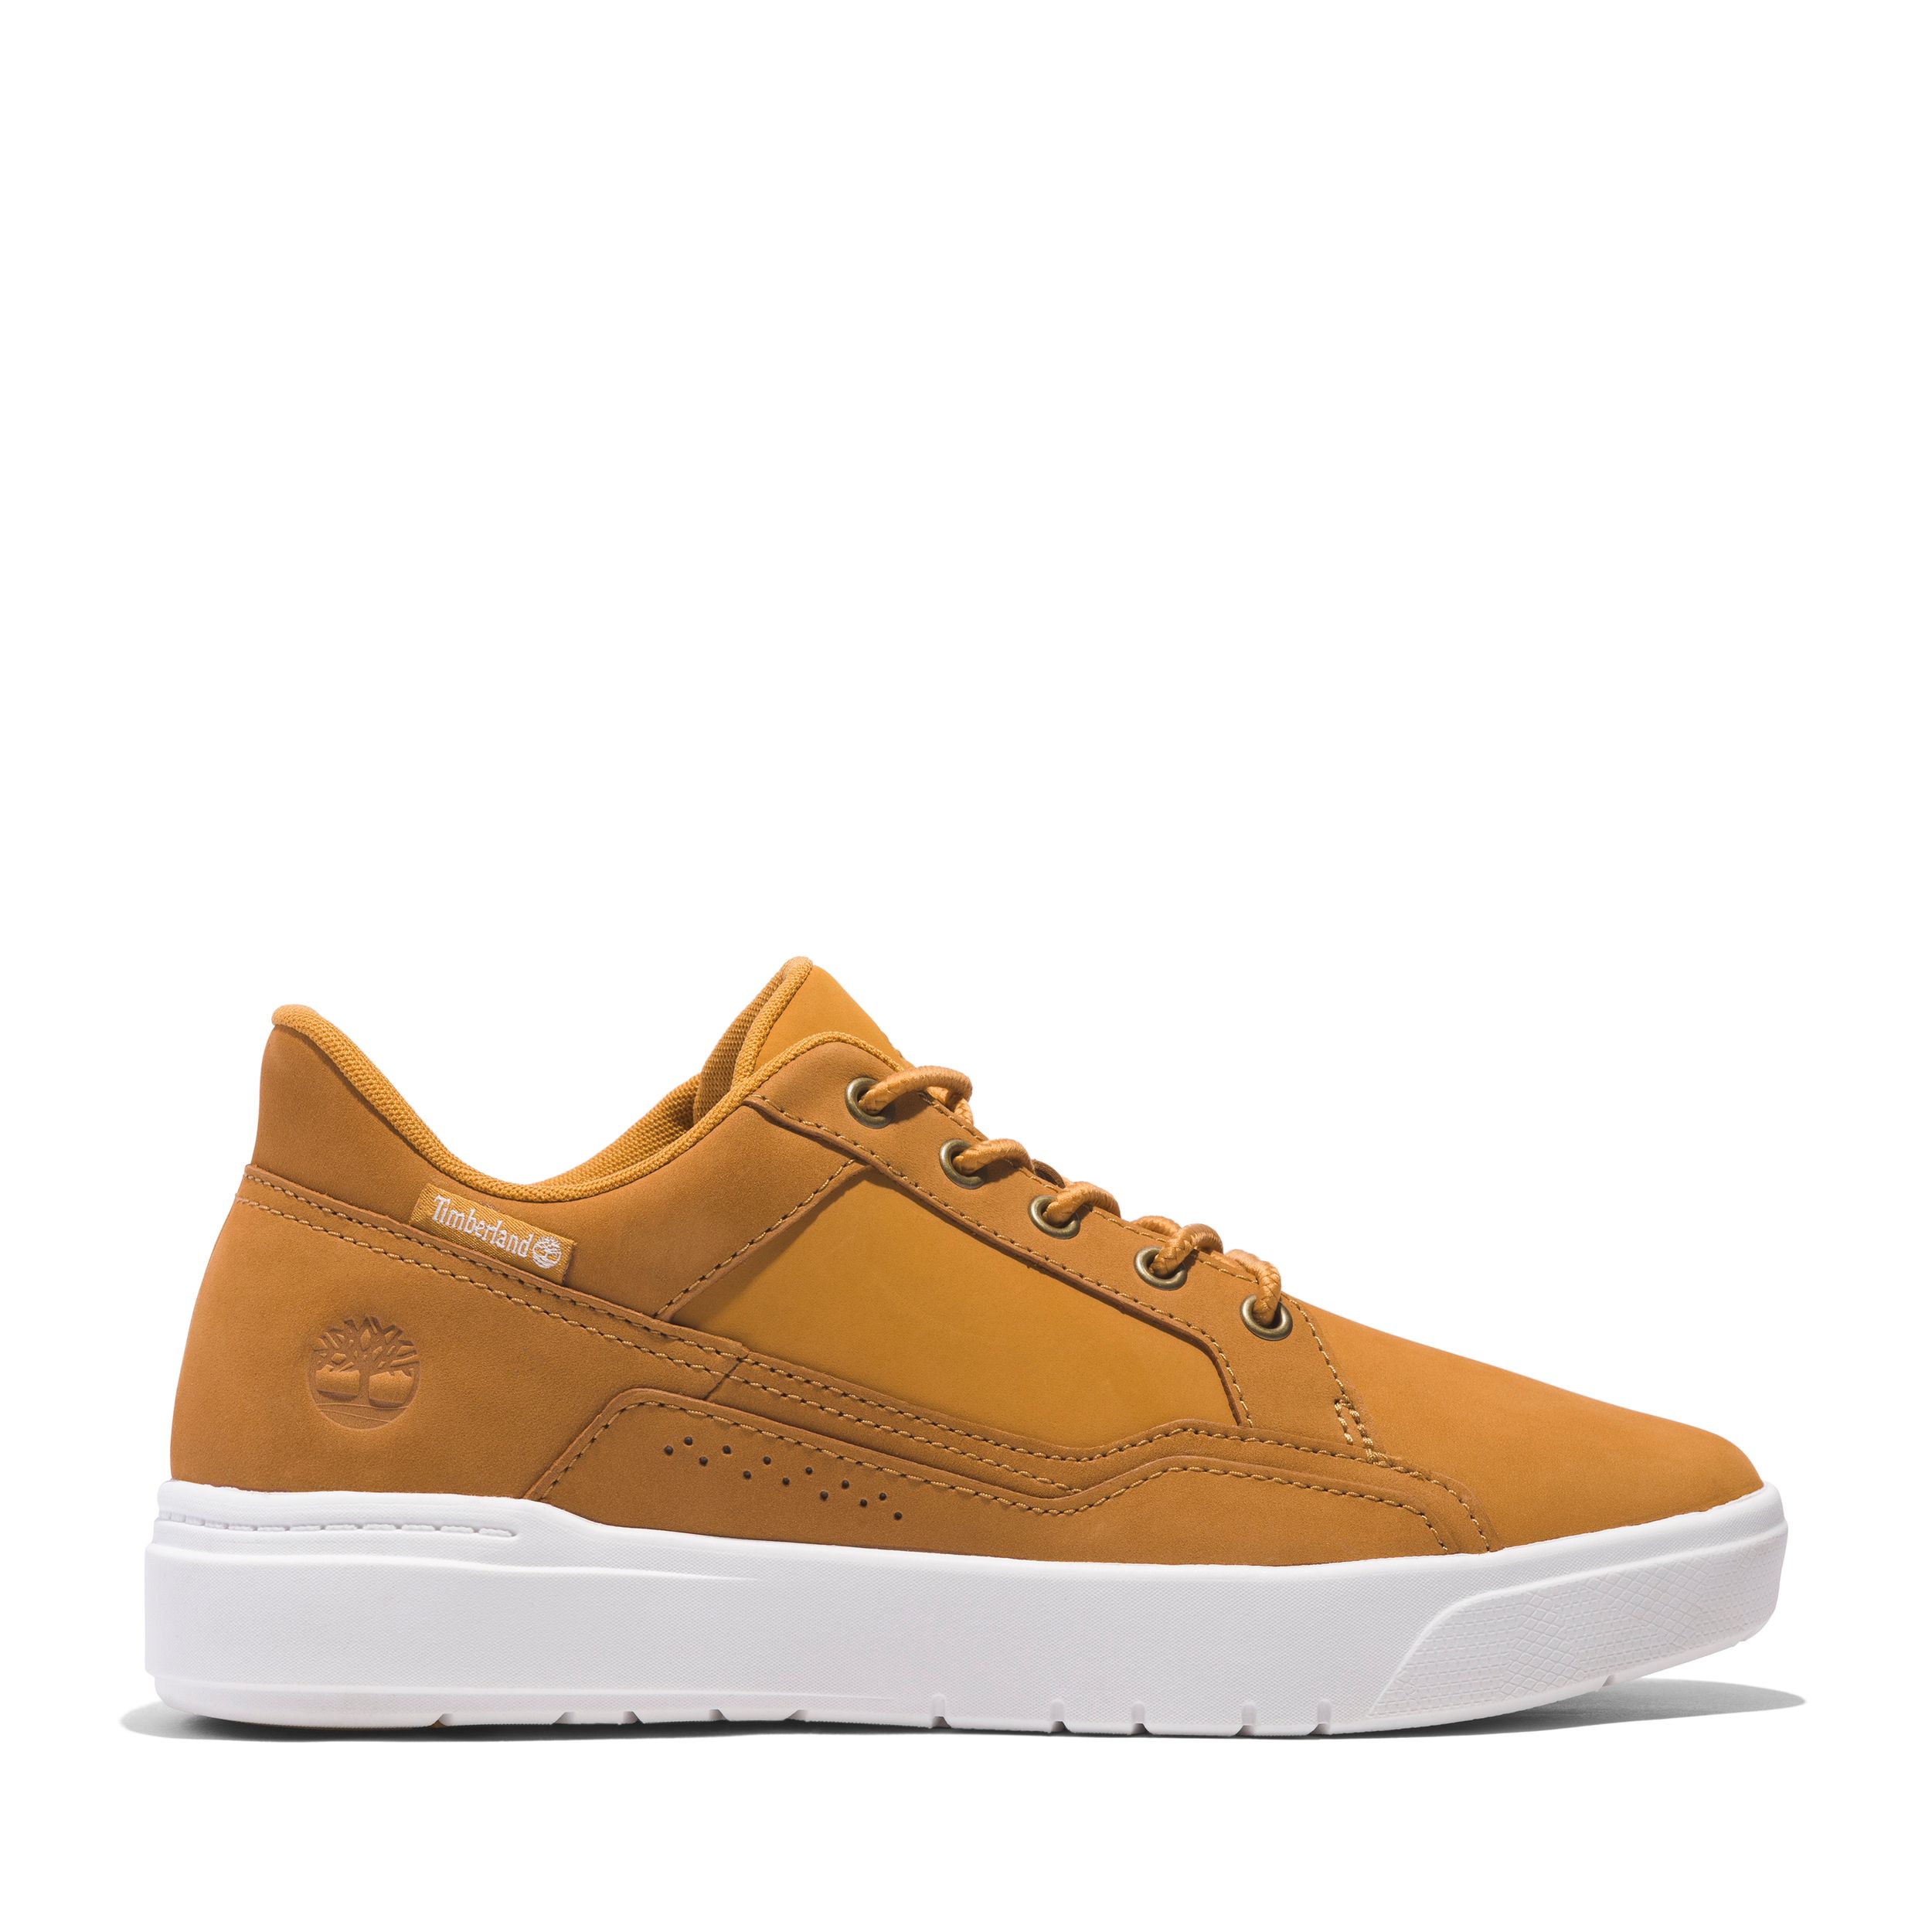 Image of Timberland Men's Allston Low Casual Shoes Sneakers